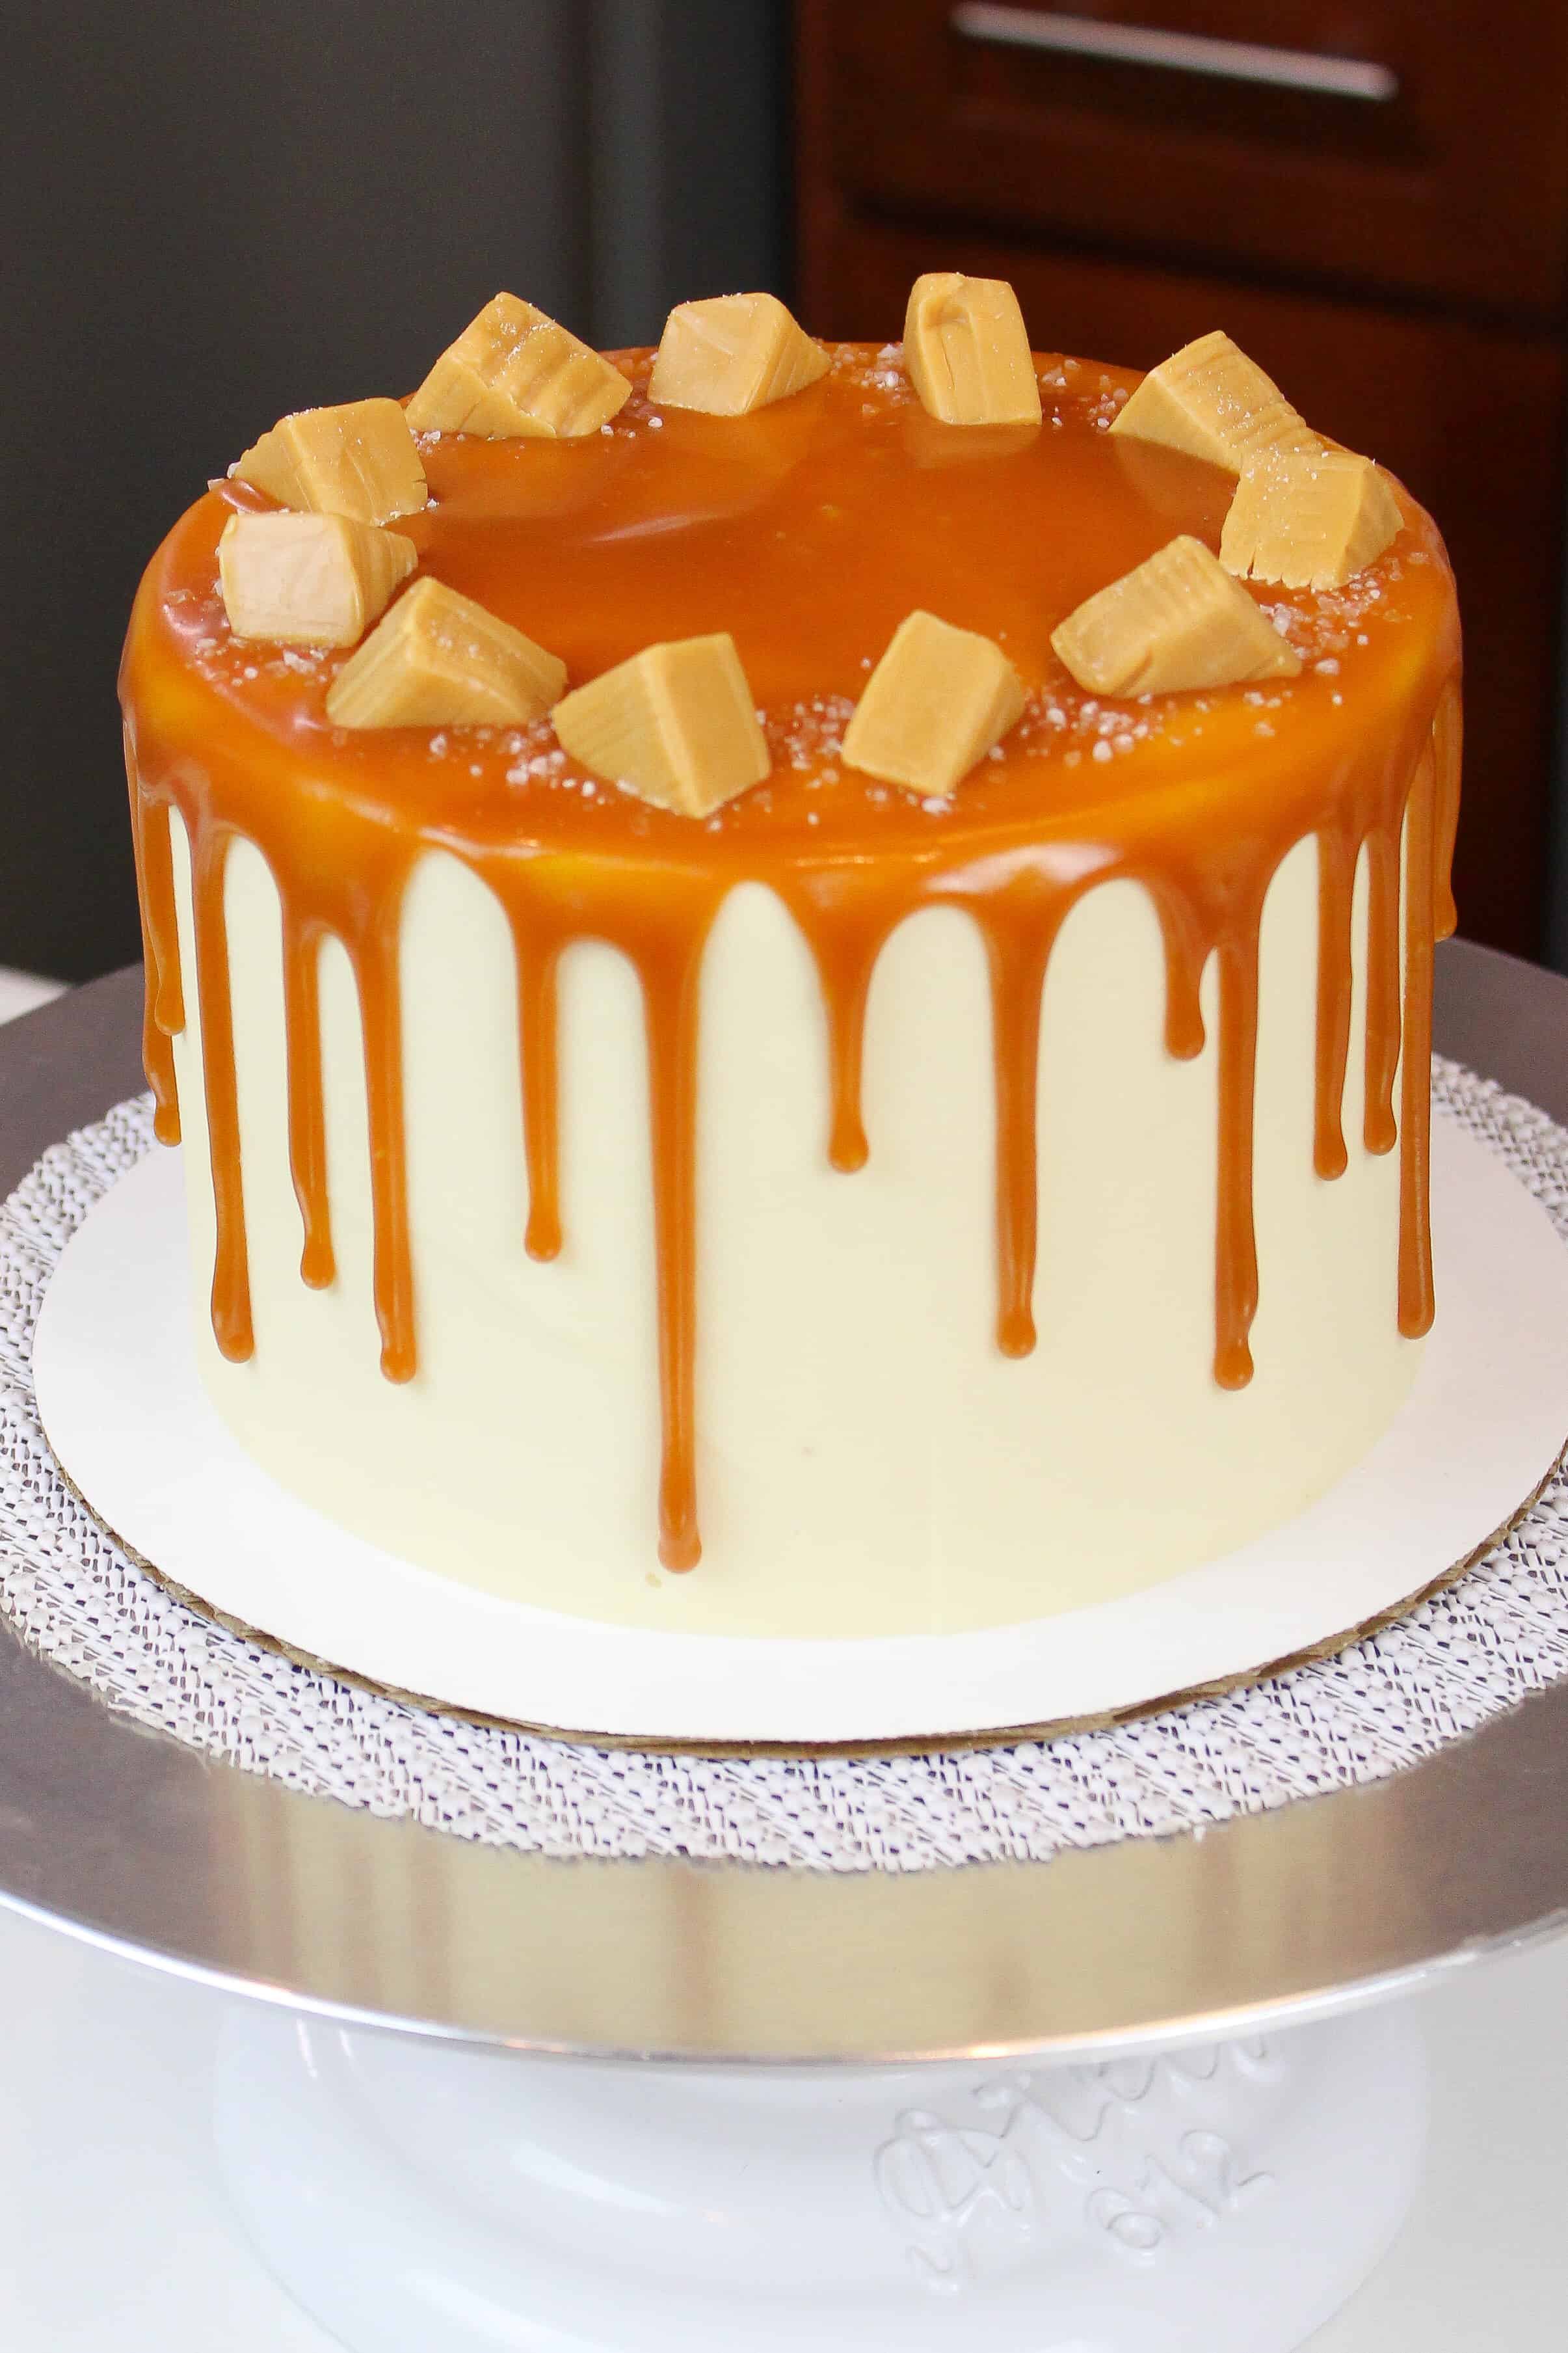 Salted Caramel Layer Cake - Delicious from Scratch Recipe